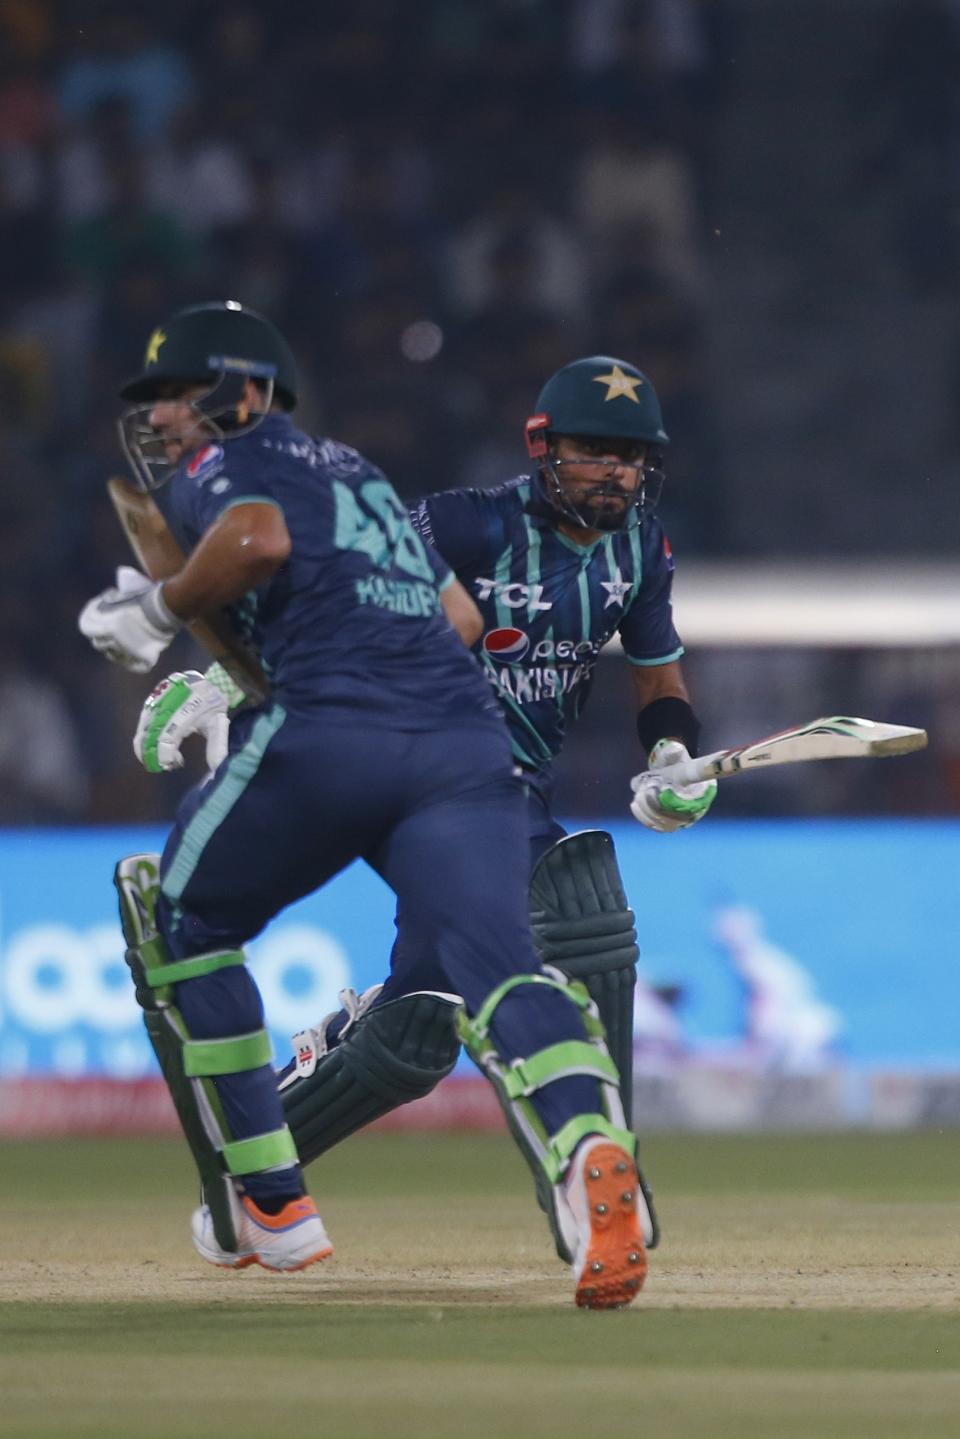 Pakistan's Babar Azam, right, and his batting partner Haider Ali run between the wickets during the sixth twenty20 cricket match between Pakistan and England, in Lahore, Pakistan, Friday, Sept. 30, 2022. (AP Photo/K.M. Chaudary)